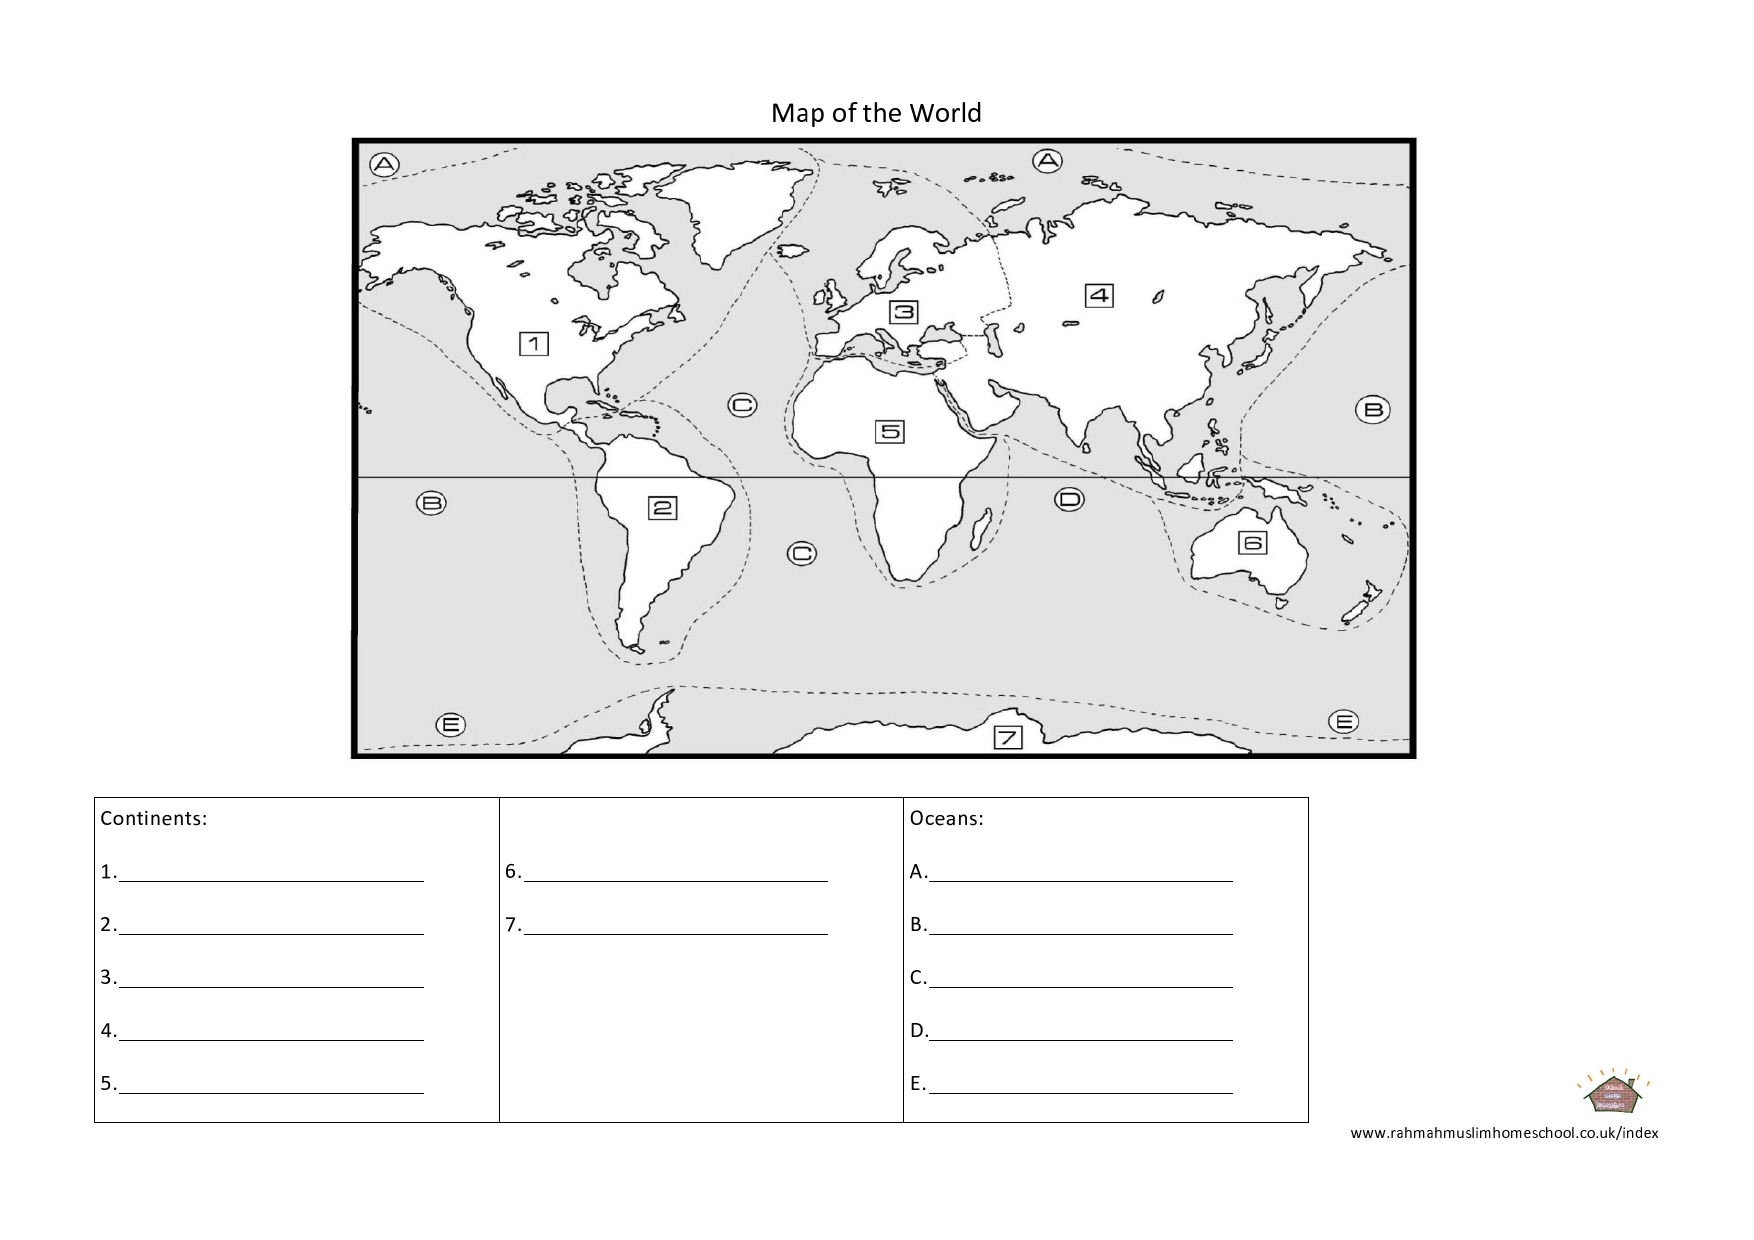 Continents And Oceans Of The World Worksheet Answer Key